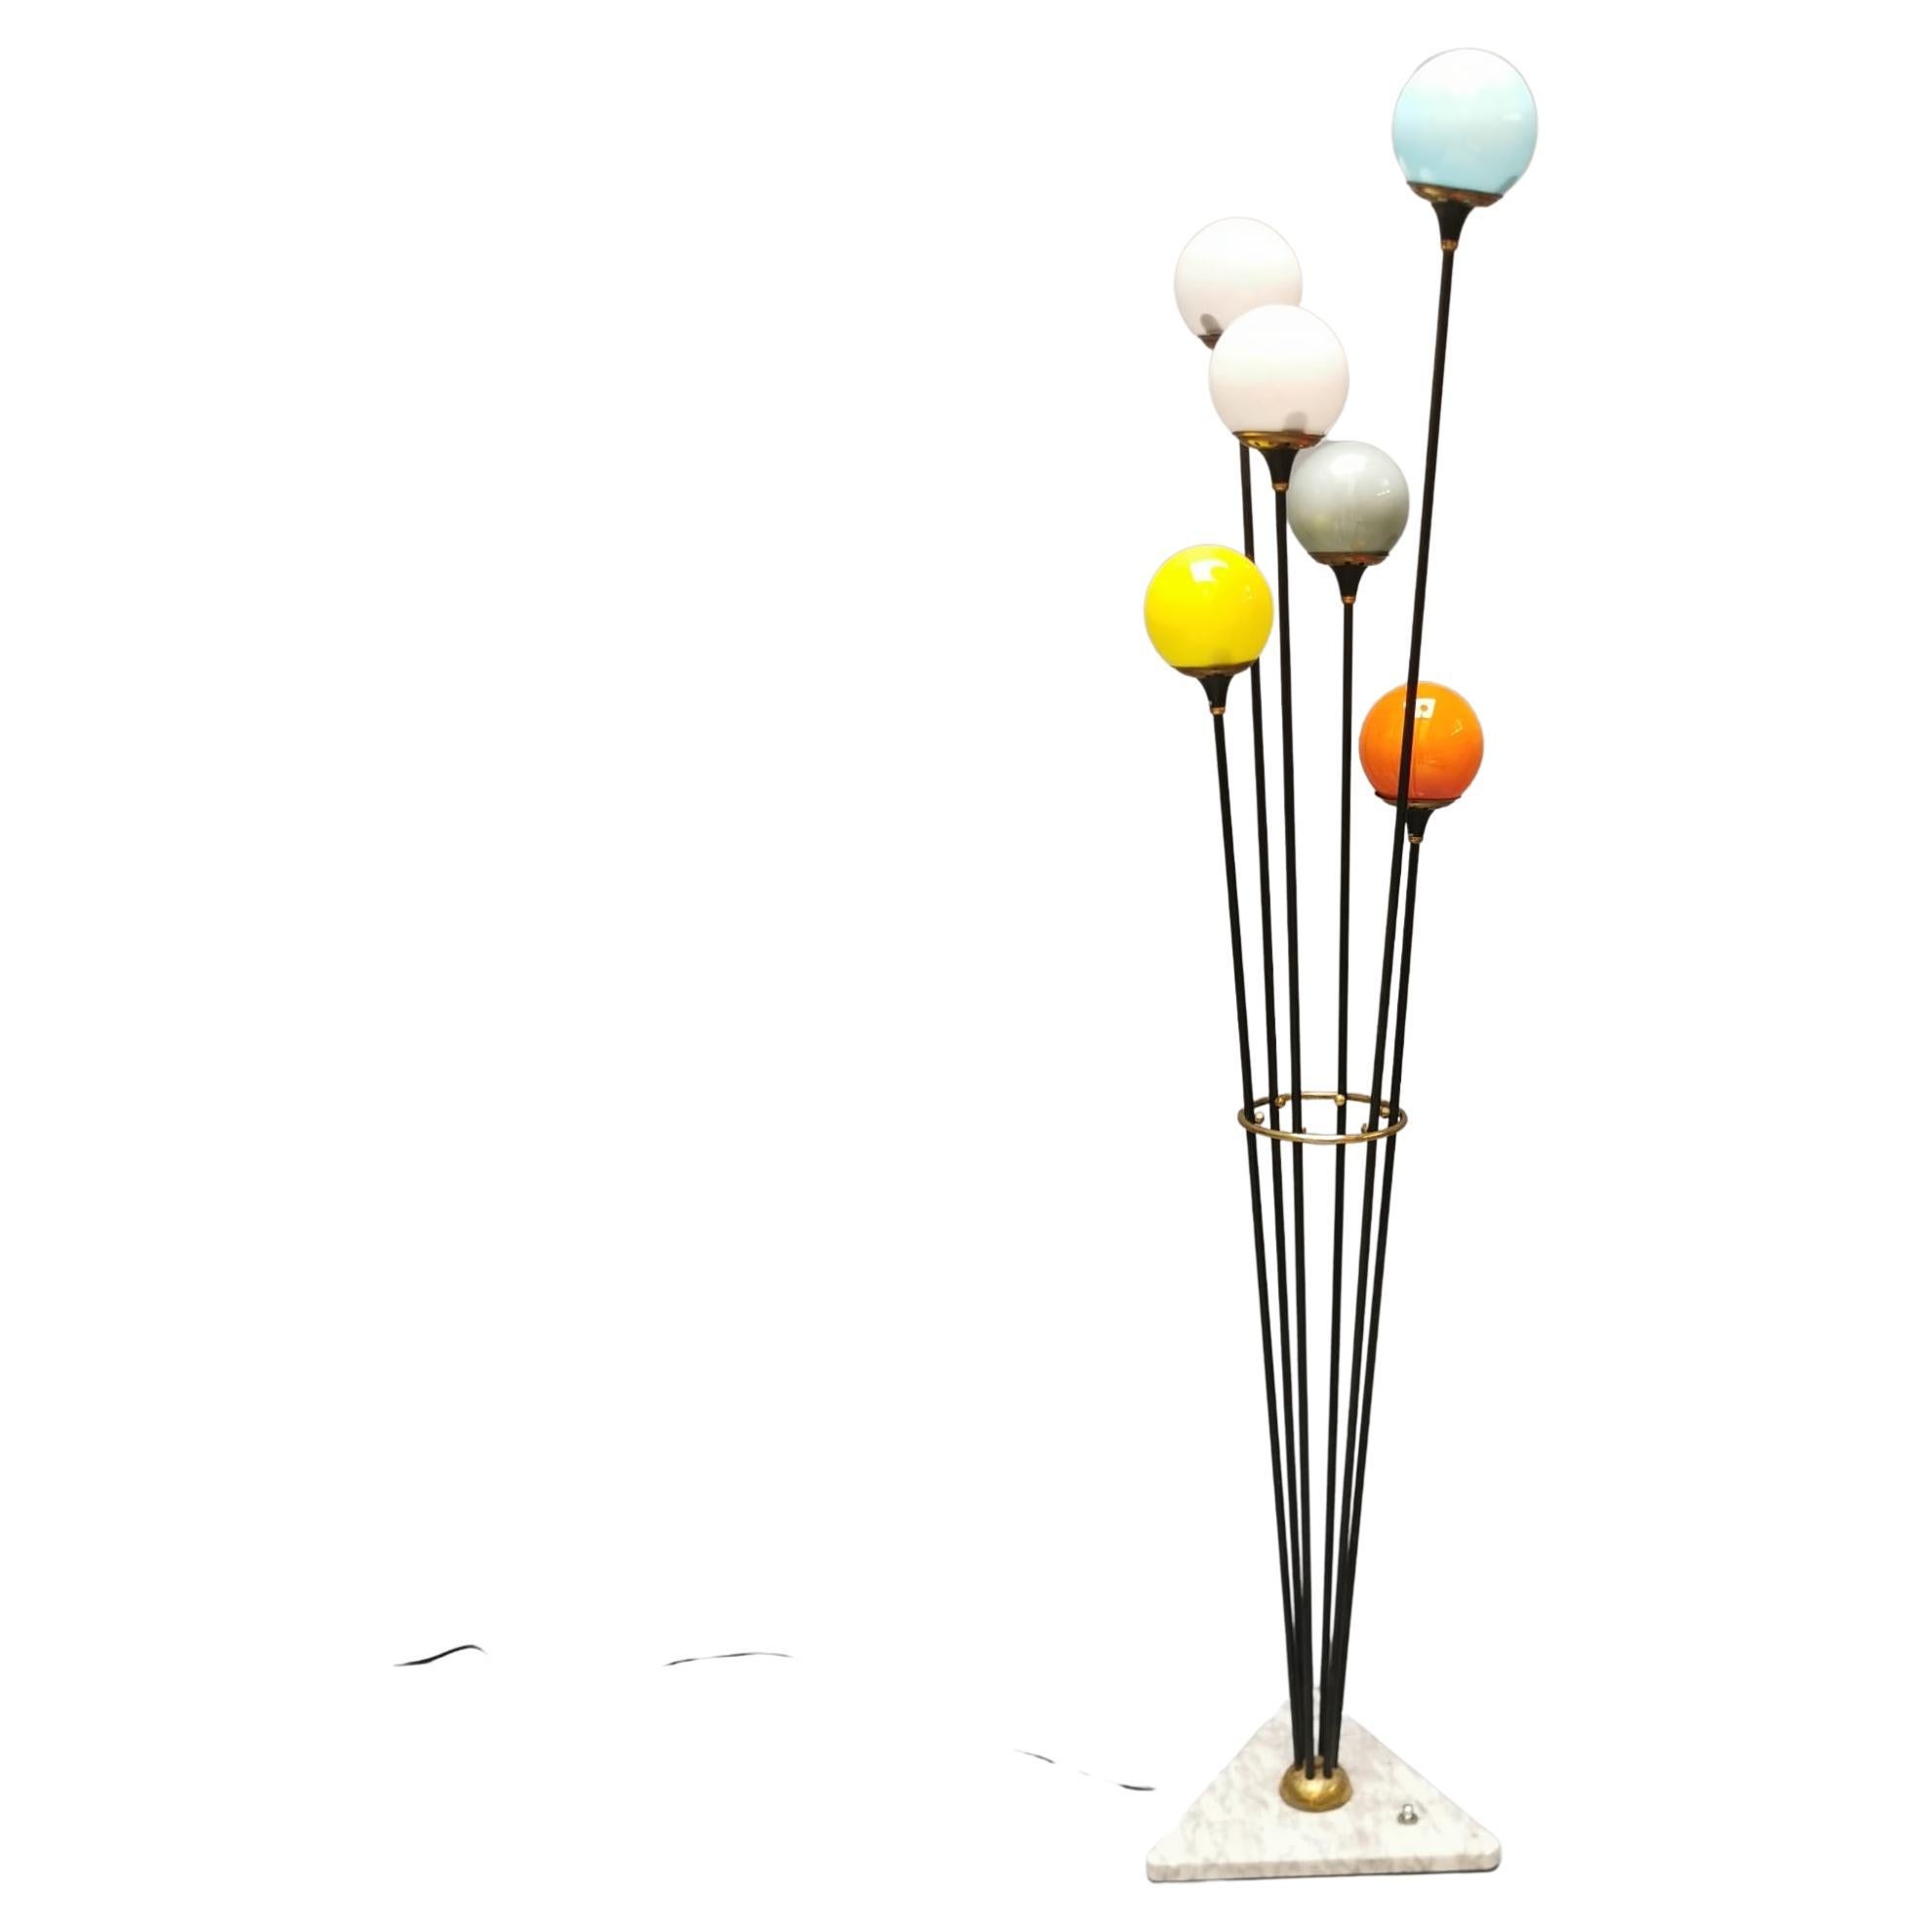 Alberello is an iconic floor lamp made by Stilnovo in Italy in the 50s. The tasteful lamp features a precious rounded Carrara marble base and six thin stems in black lacquered metal. Each of the floors shows refined brass details and a refined